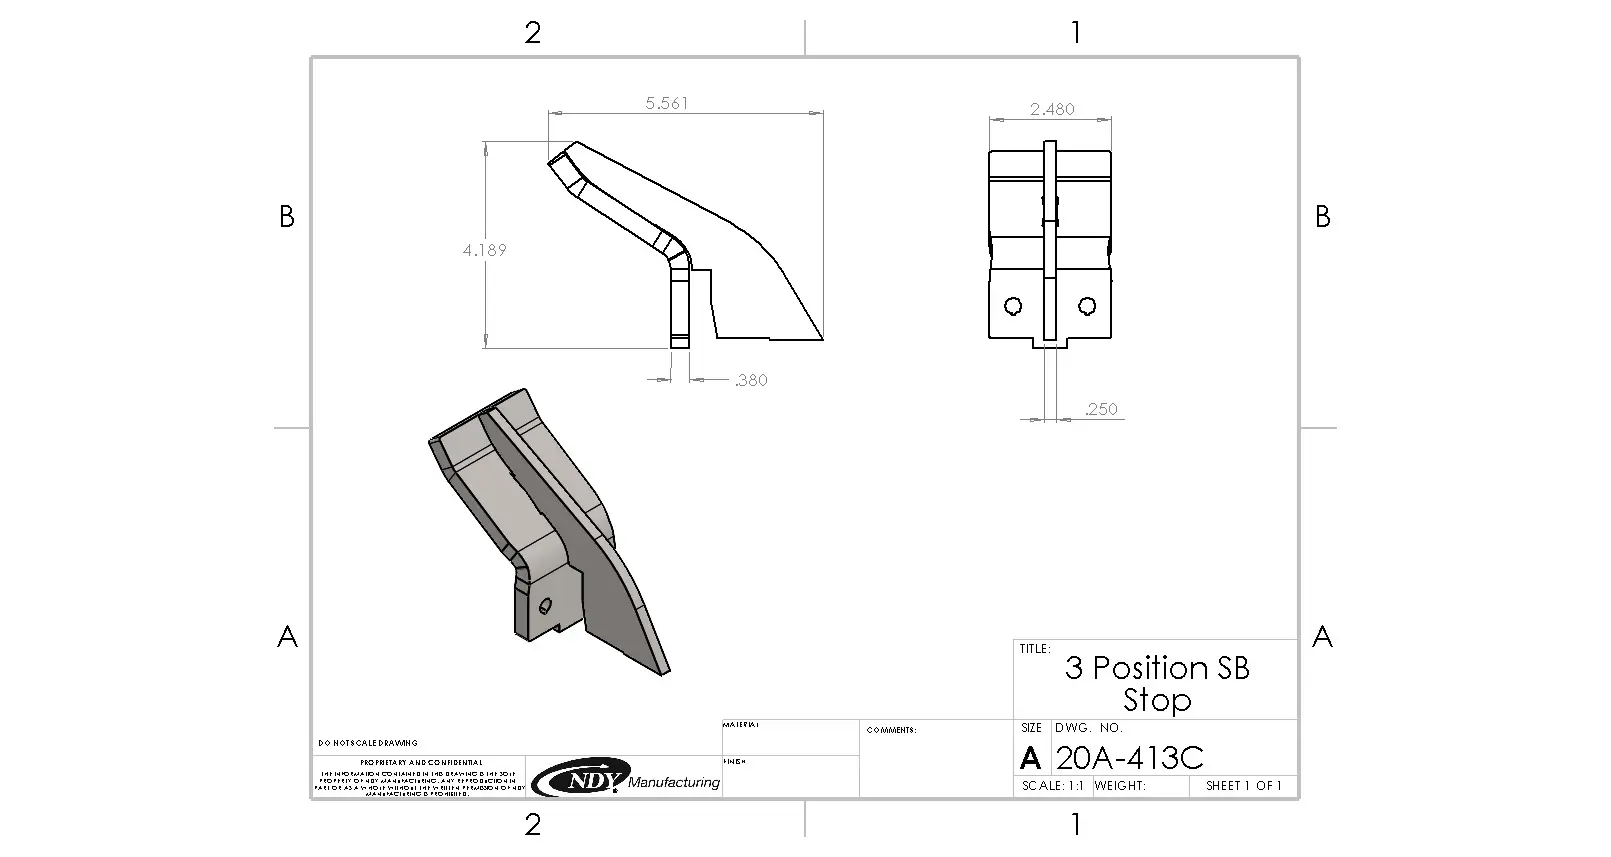 A drawing showing the dimensions of a Stalk Stomper Stop for Setback Style Arm and Shoe Assembly.